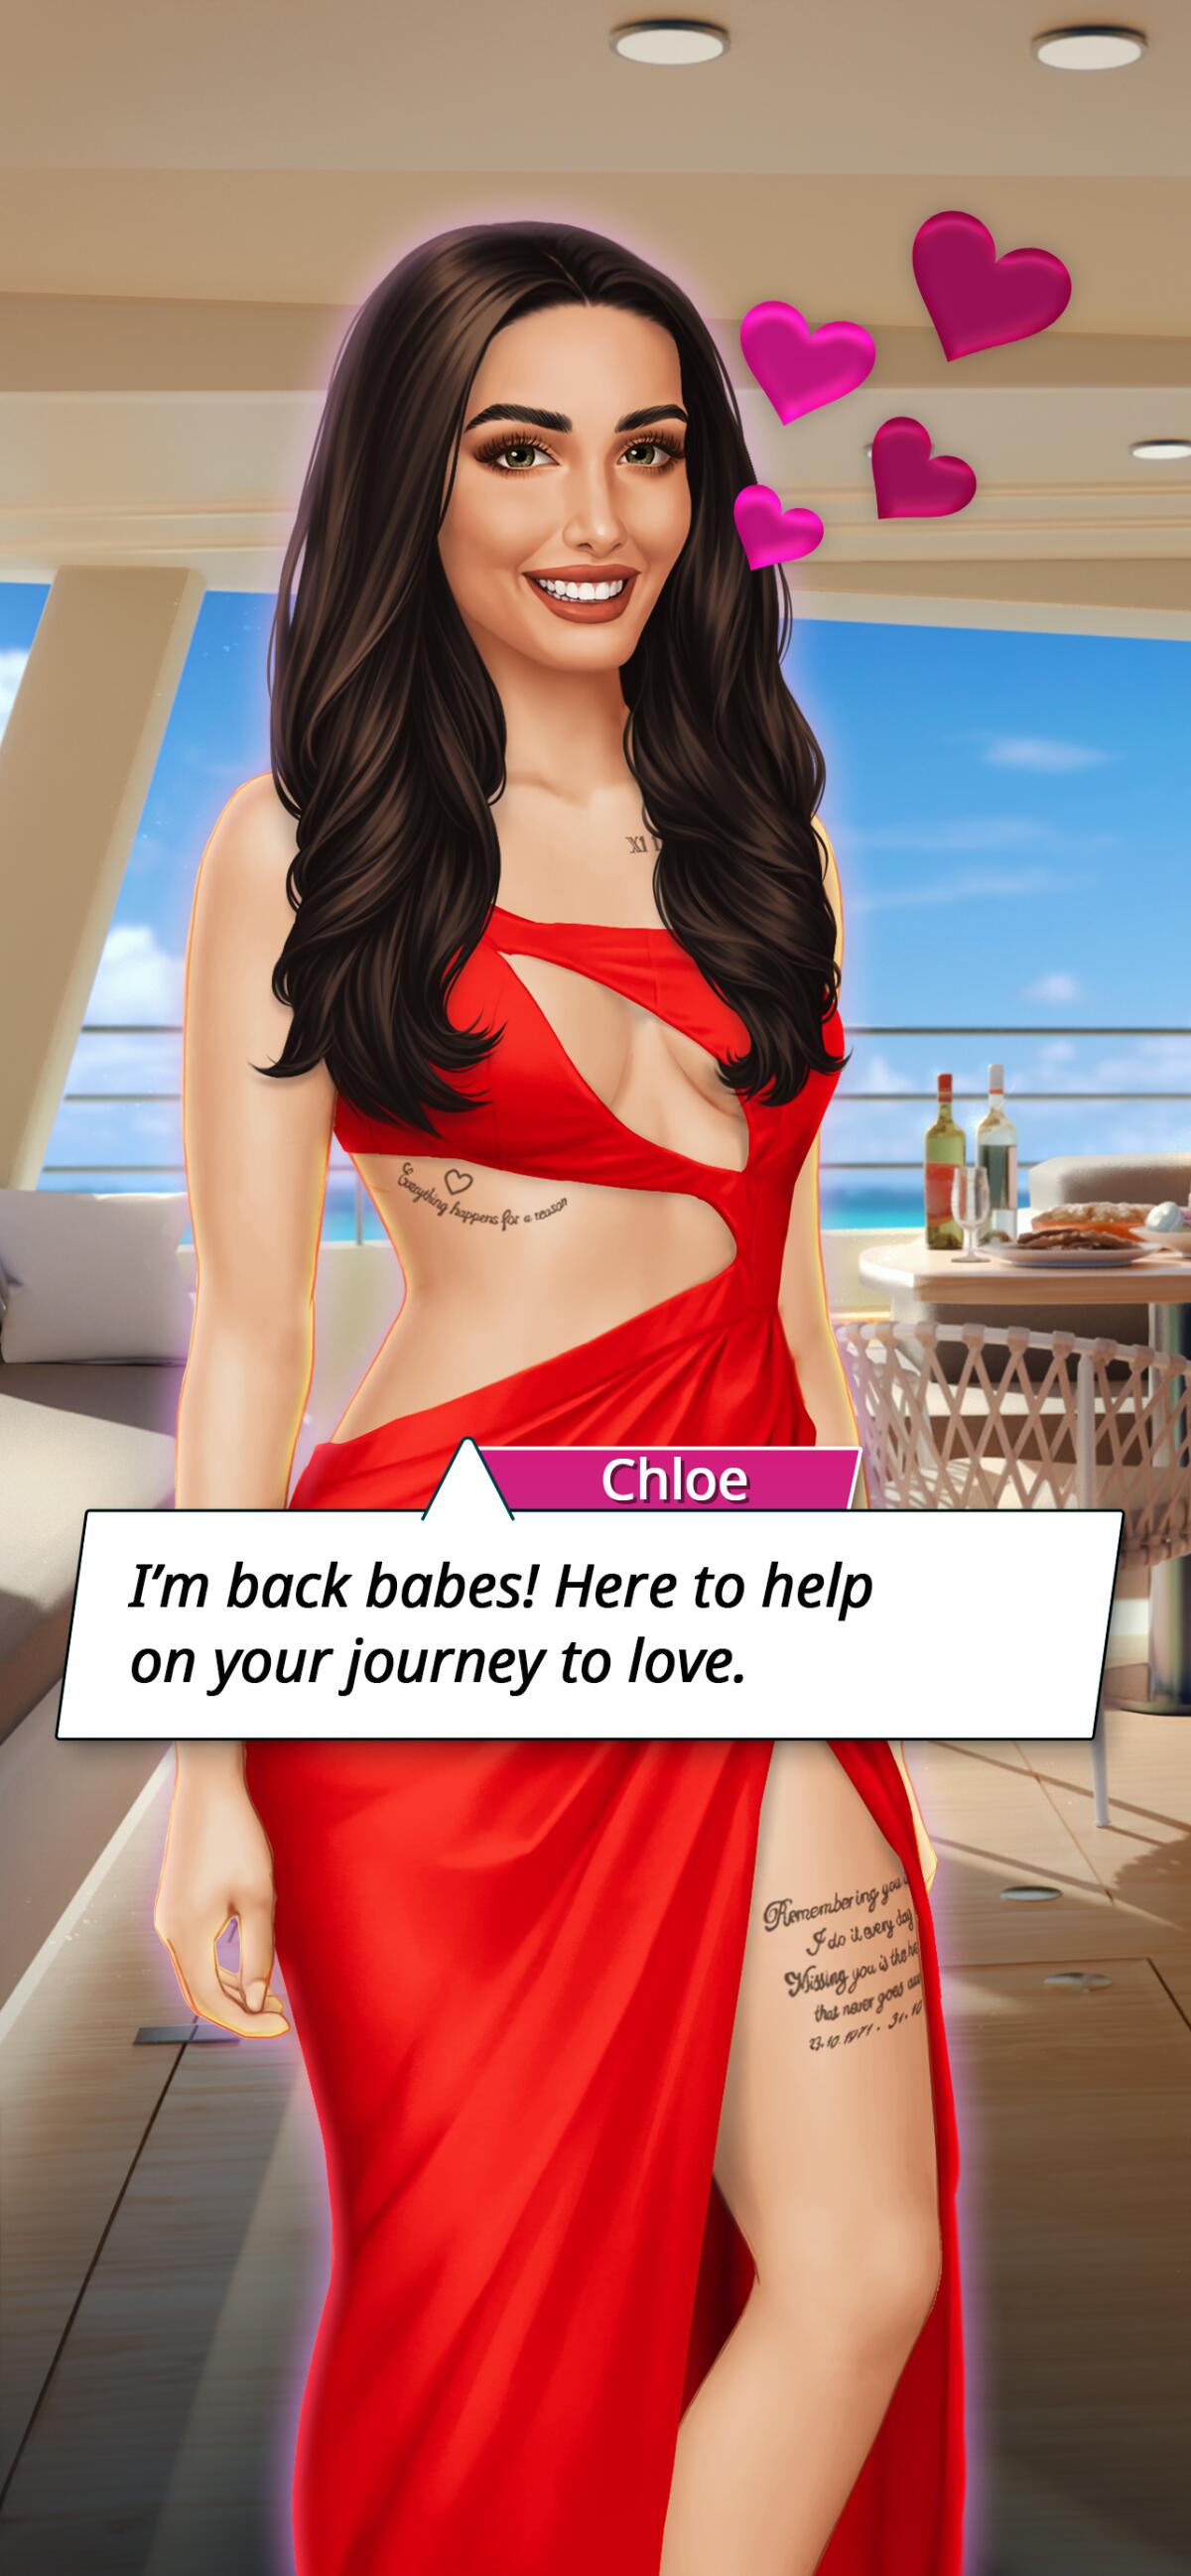 An image of an animated version of Netflix reality show star Chloe Veitch